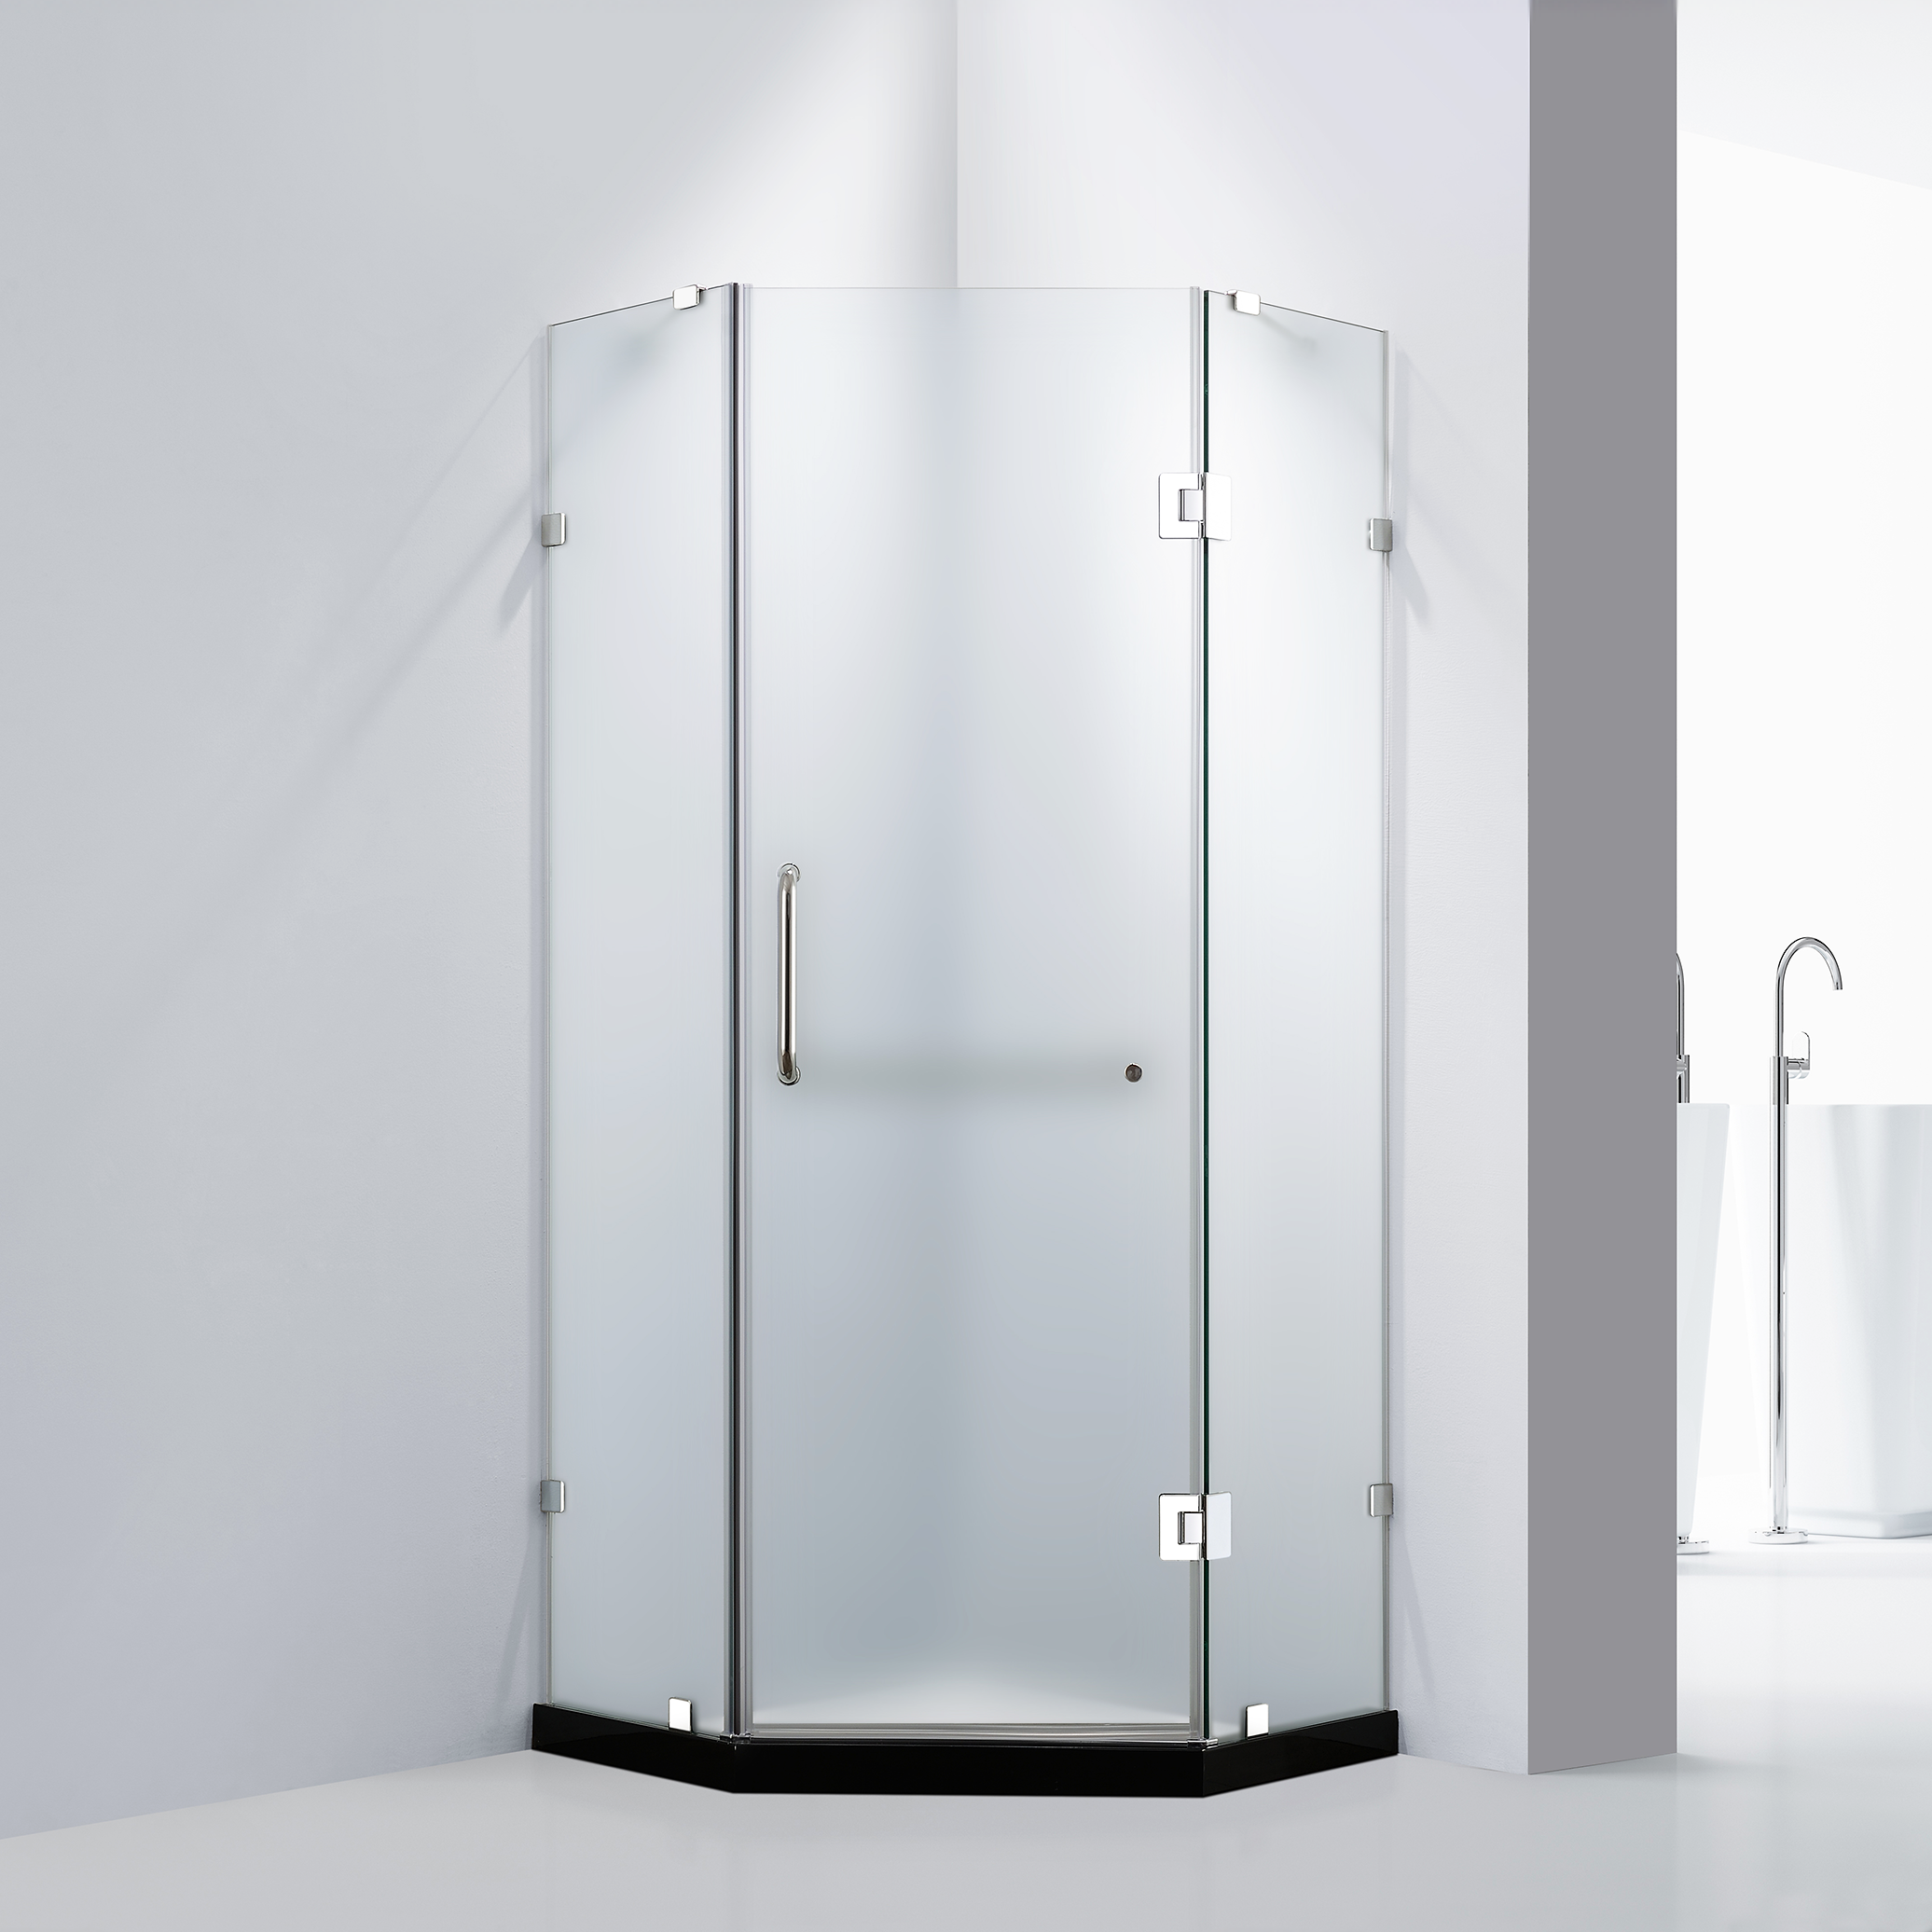 Dreamwerks 39.4"W x 79"H Frameless Neo-Angle Hinged Shower Door - Available in Clear or Frosted Glass